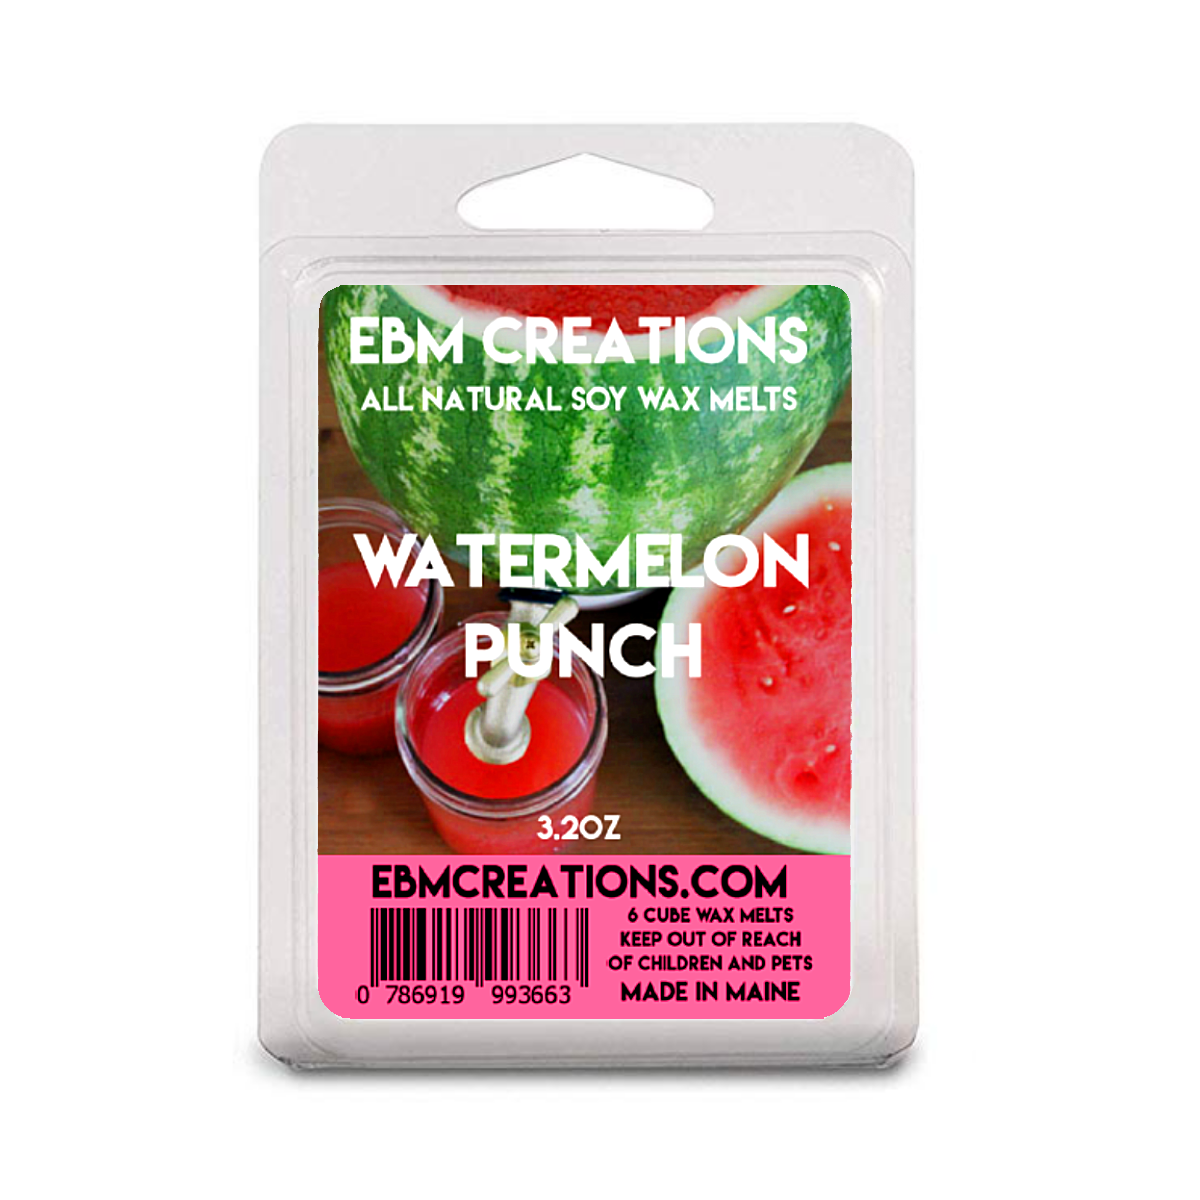 Watermelon Punch - 3.2 oz Clamshell